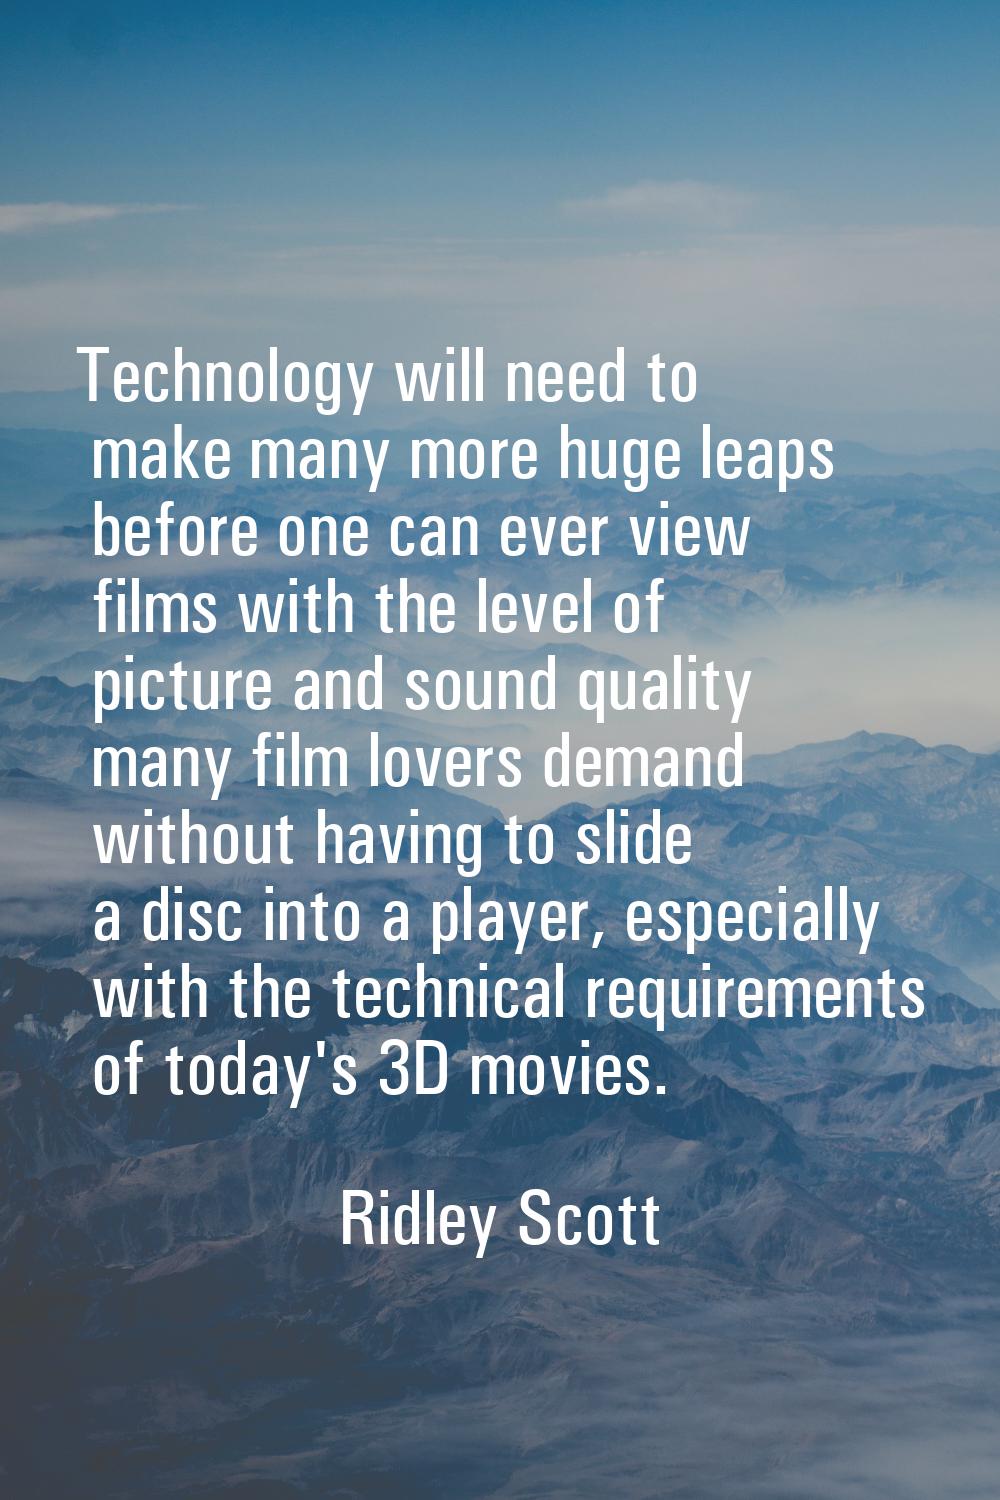 Technology will need to make many more huge leaps before one can ever view films with the level of 